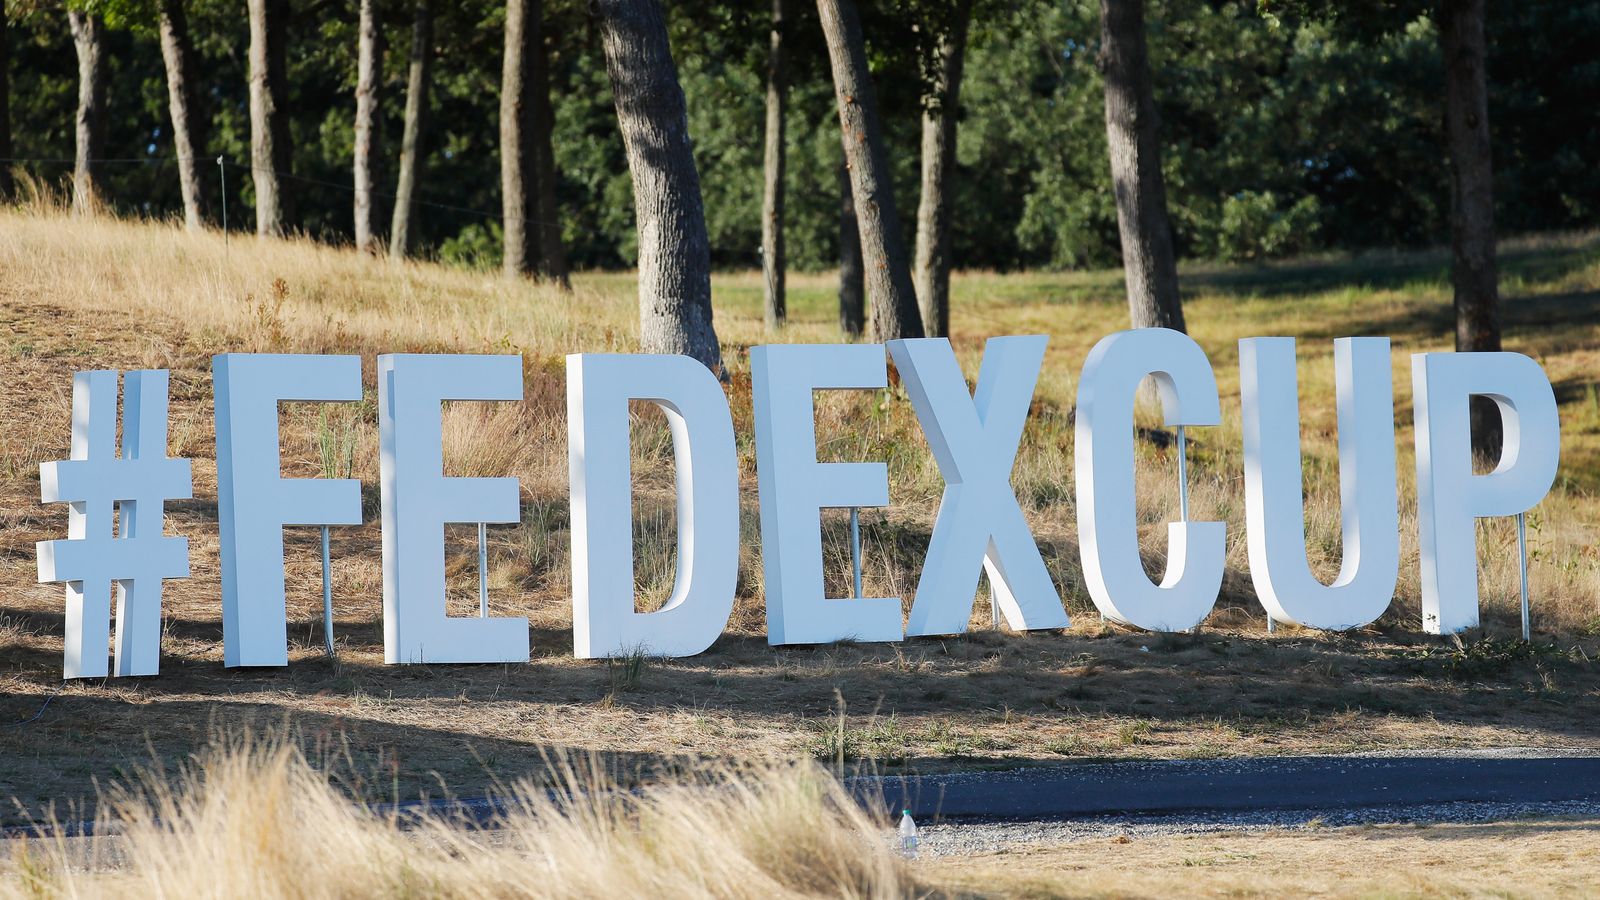 fedex cup round 4 tee times